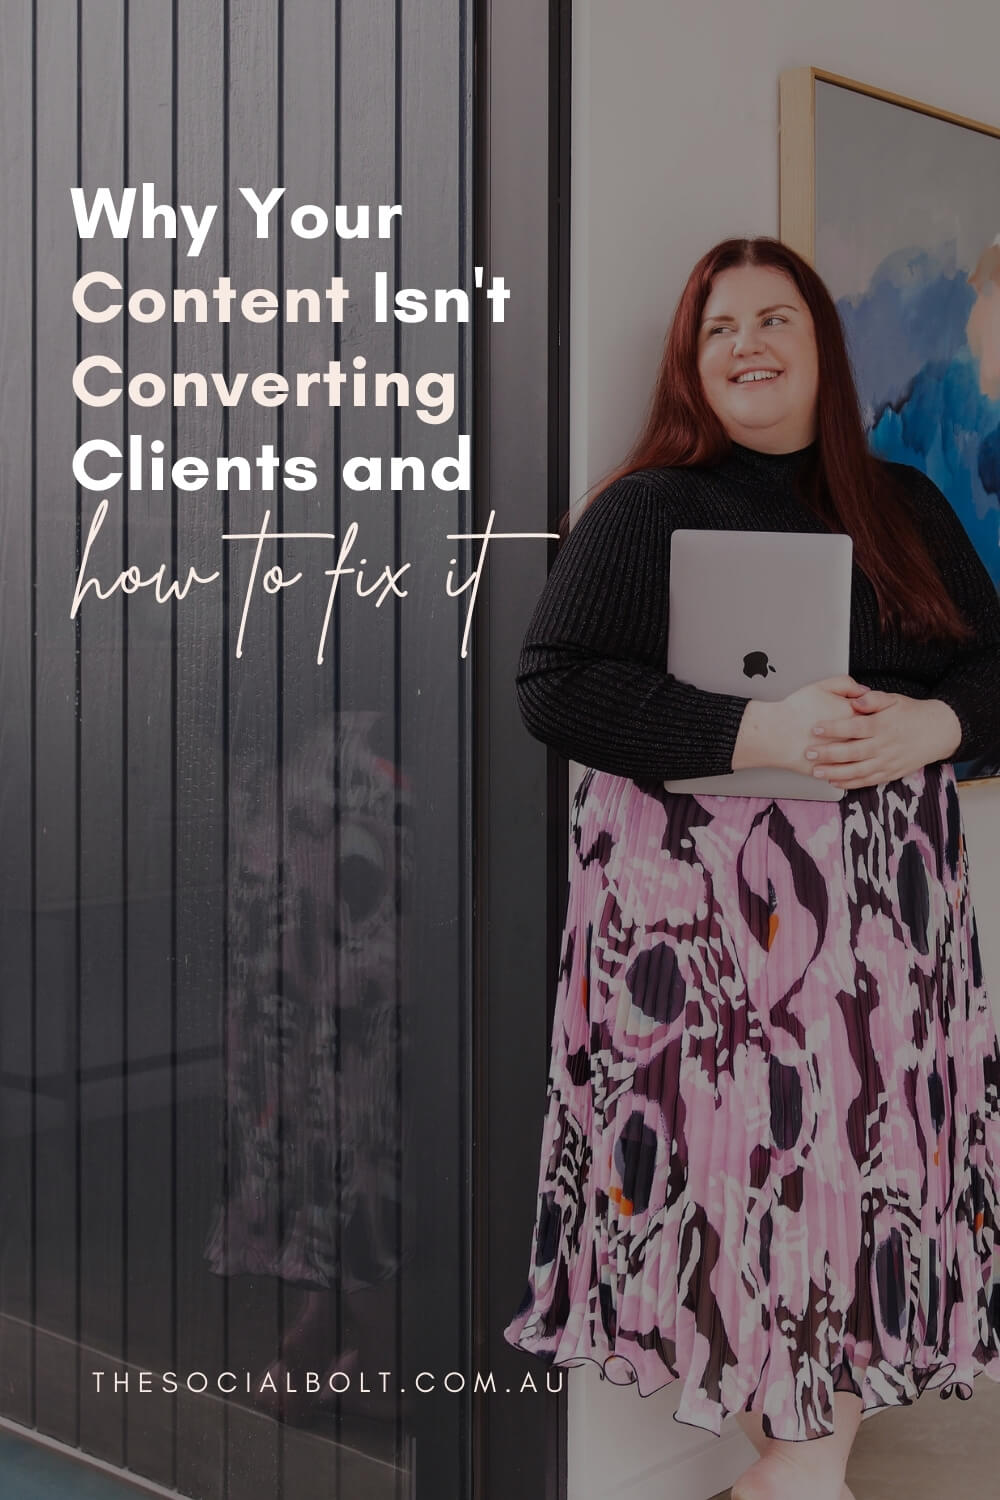 Why Your Content Isn't Converting Clients and How to Fix It